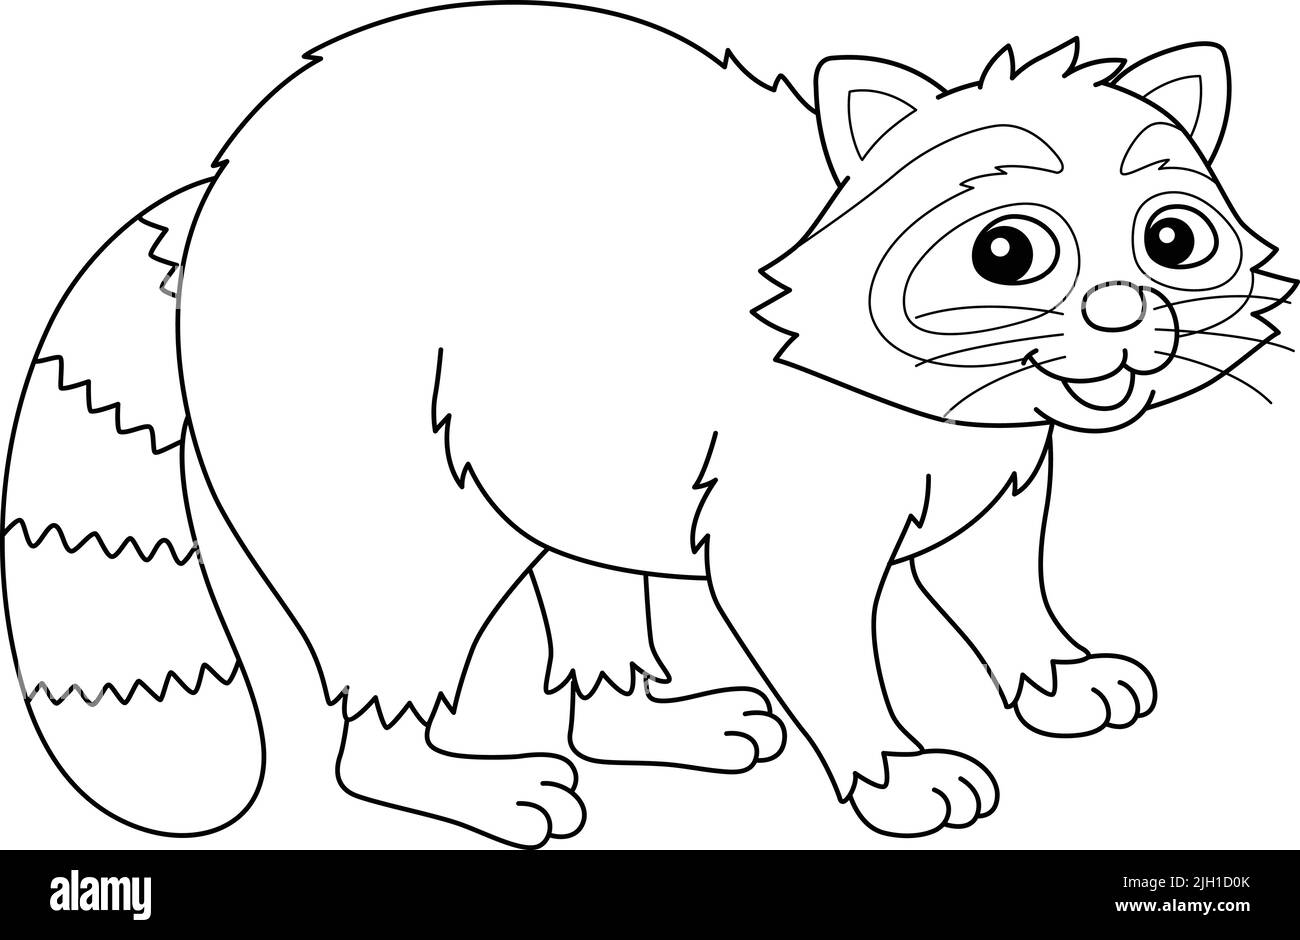 Racoon Animal Coloring Page for Kids Stock Vector